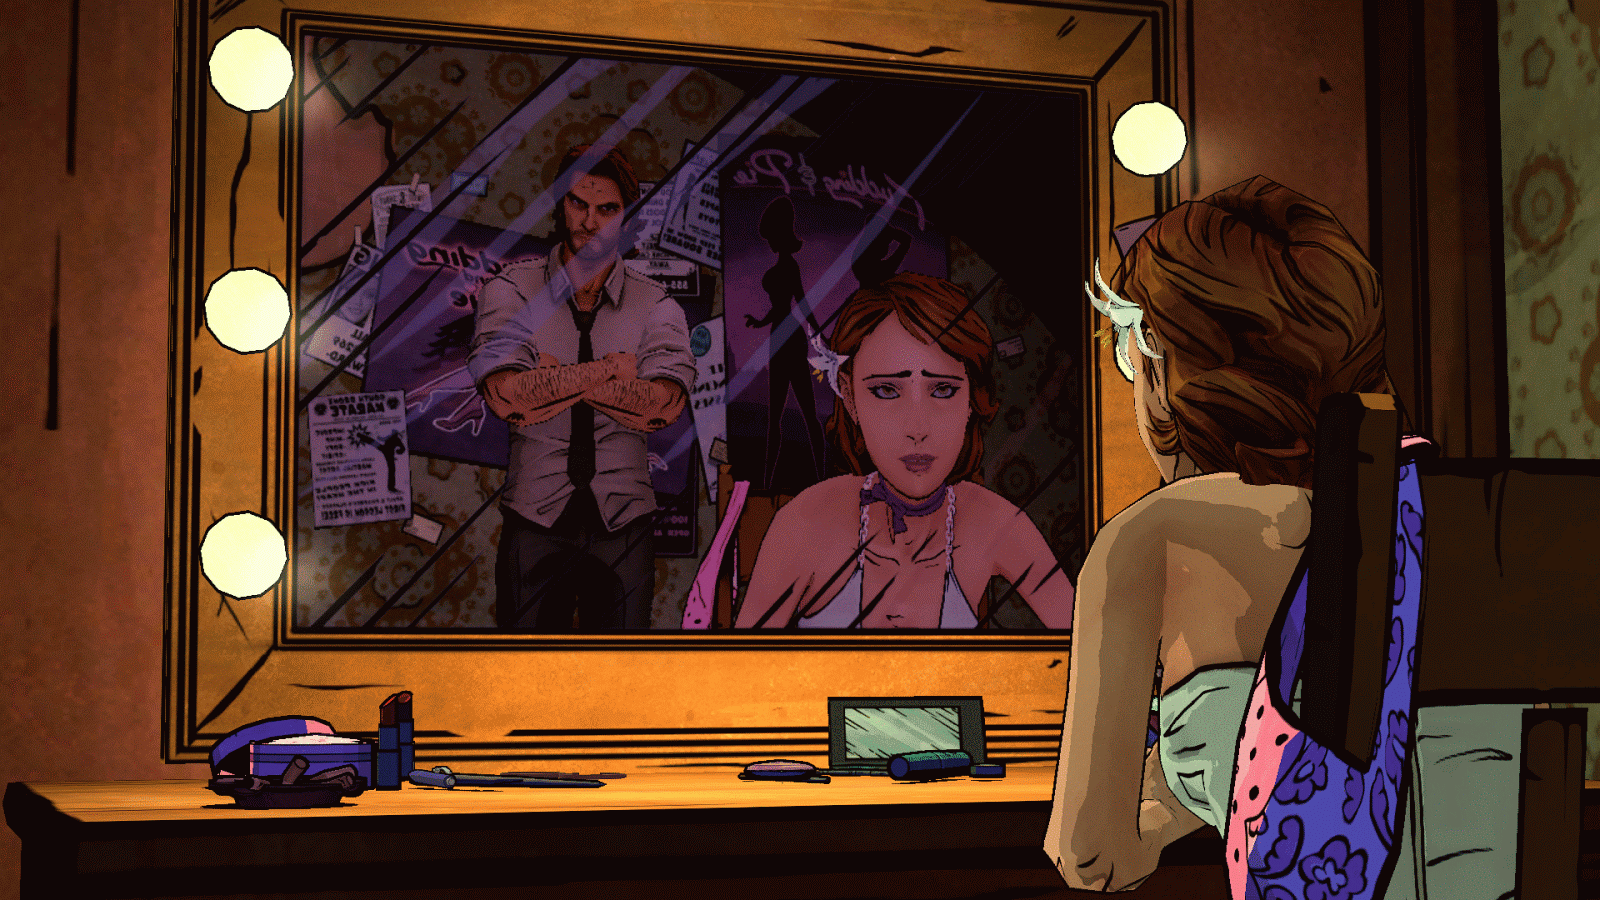 Let us for the best. The Wolf among us Нерисса. The Wolf among us Бигби и Нерисса. Нерисса волк the Wolf among us.